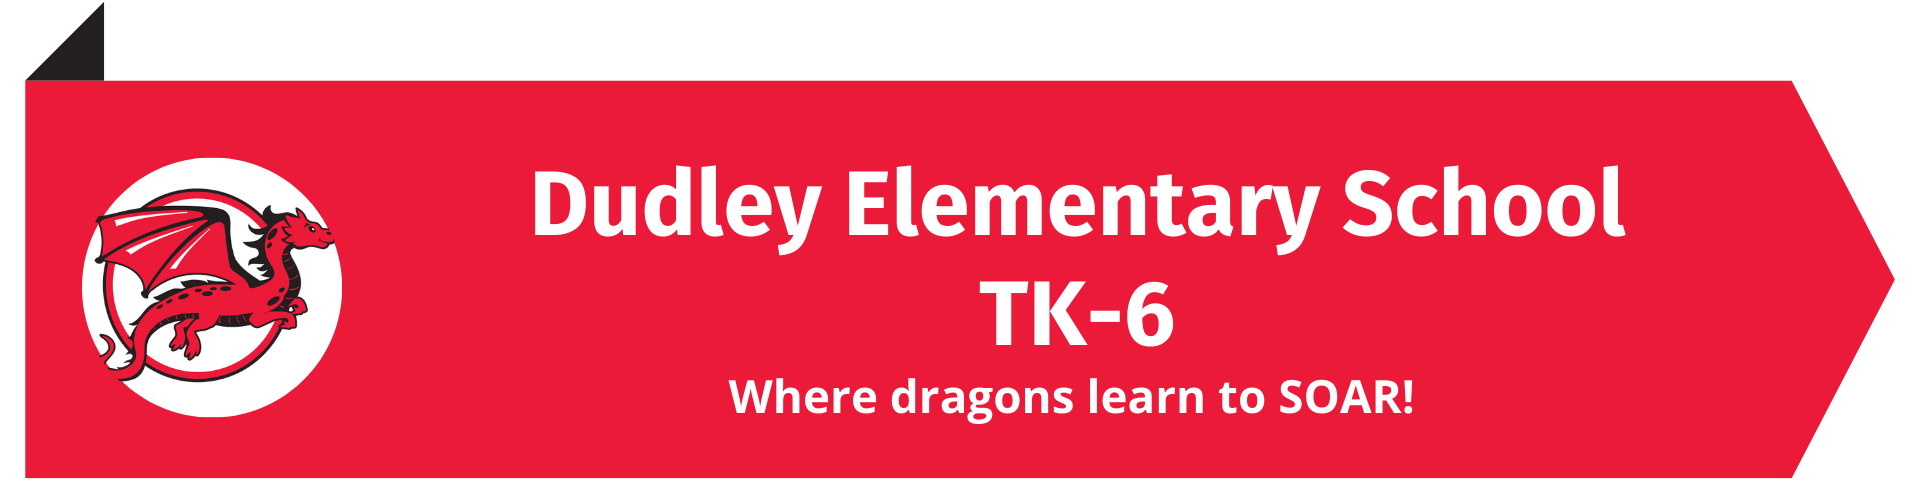 Dudley logo, Banner:where dragons learn to soar